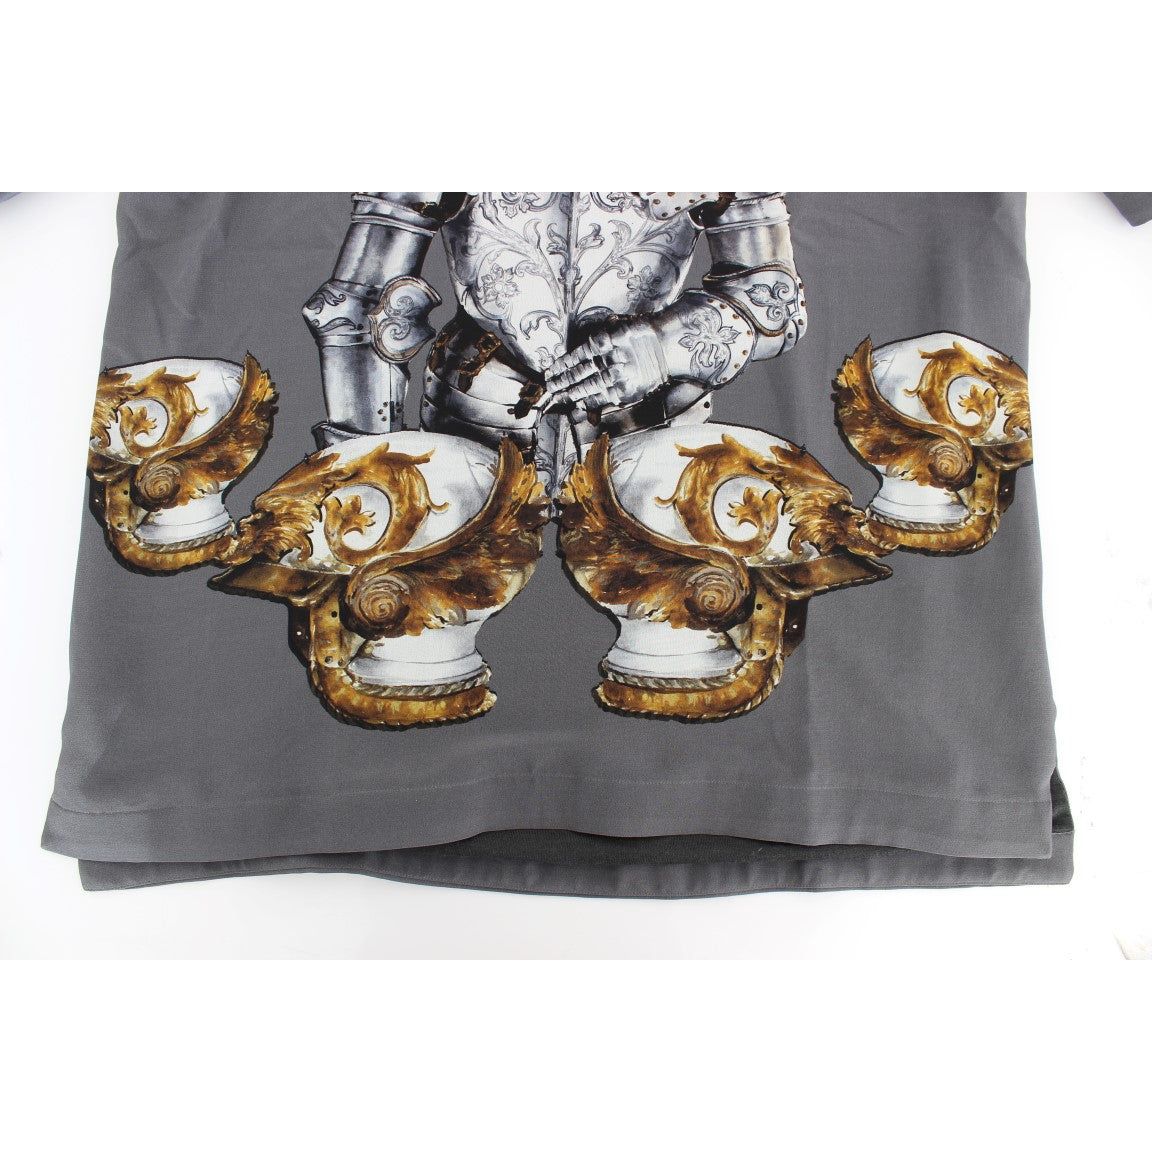 Dolce & Gabbana Enchanted Sicily Silk Blouse with Knight Print gray-knight-crown-print-silk-blouse-top